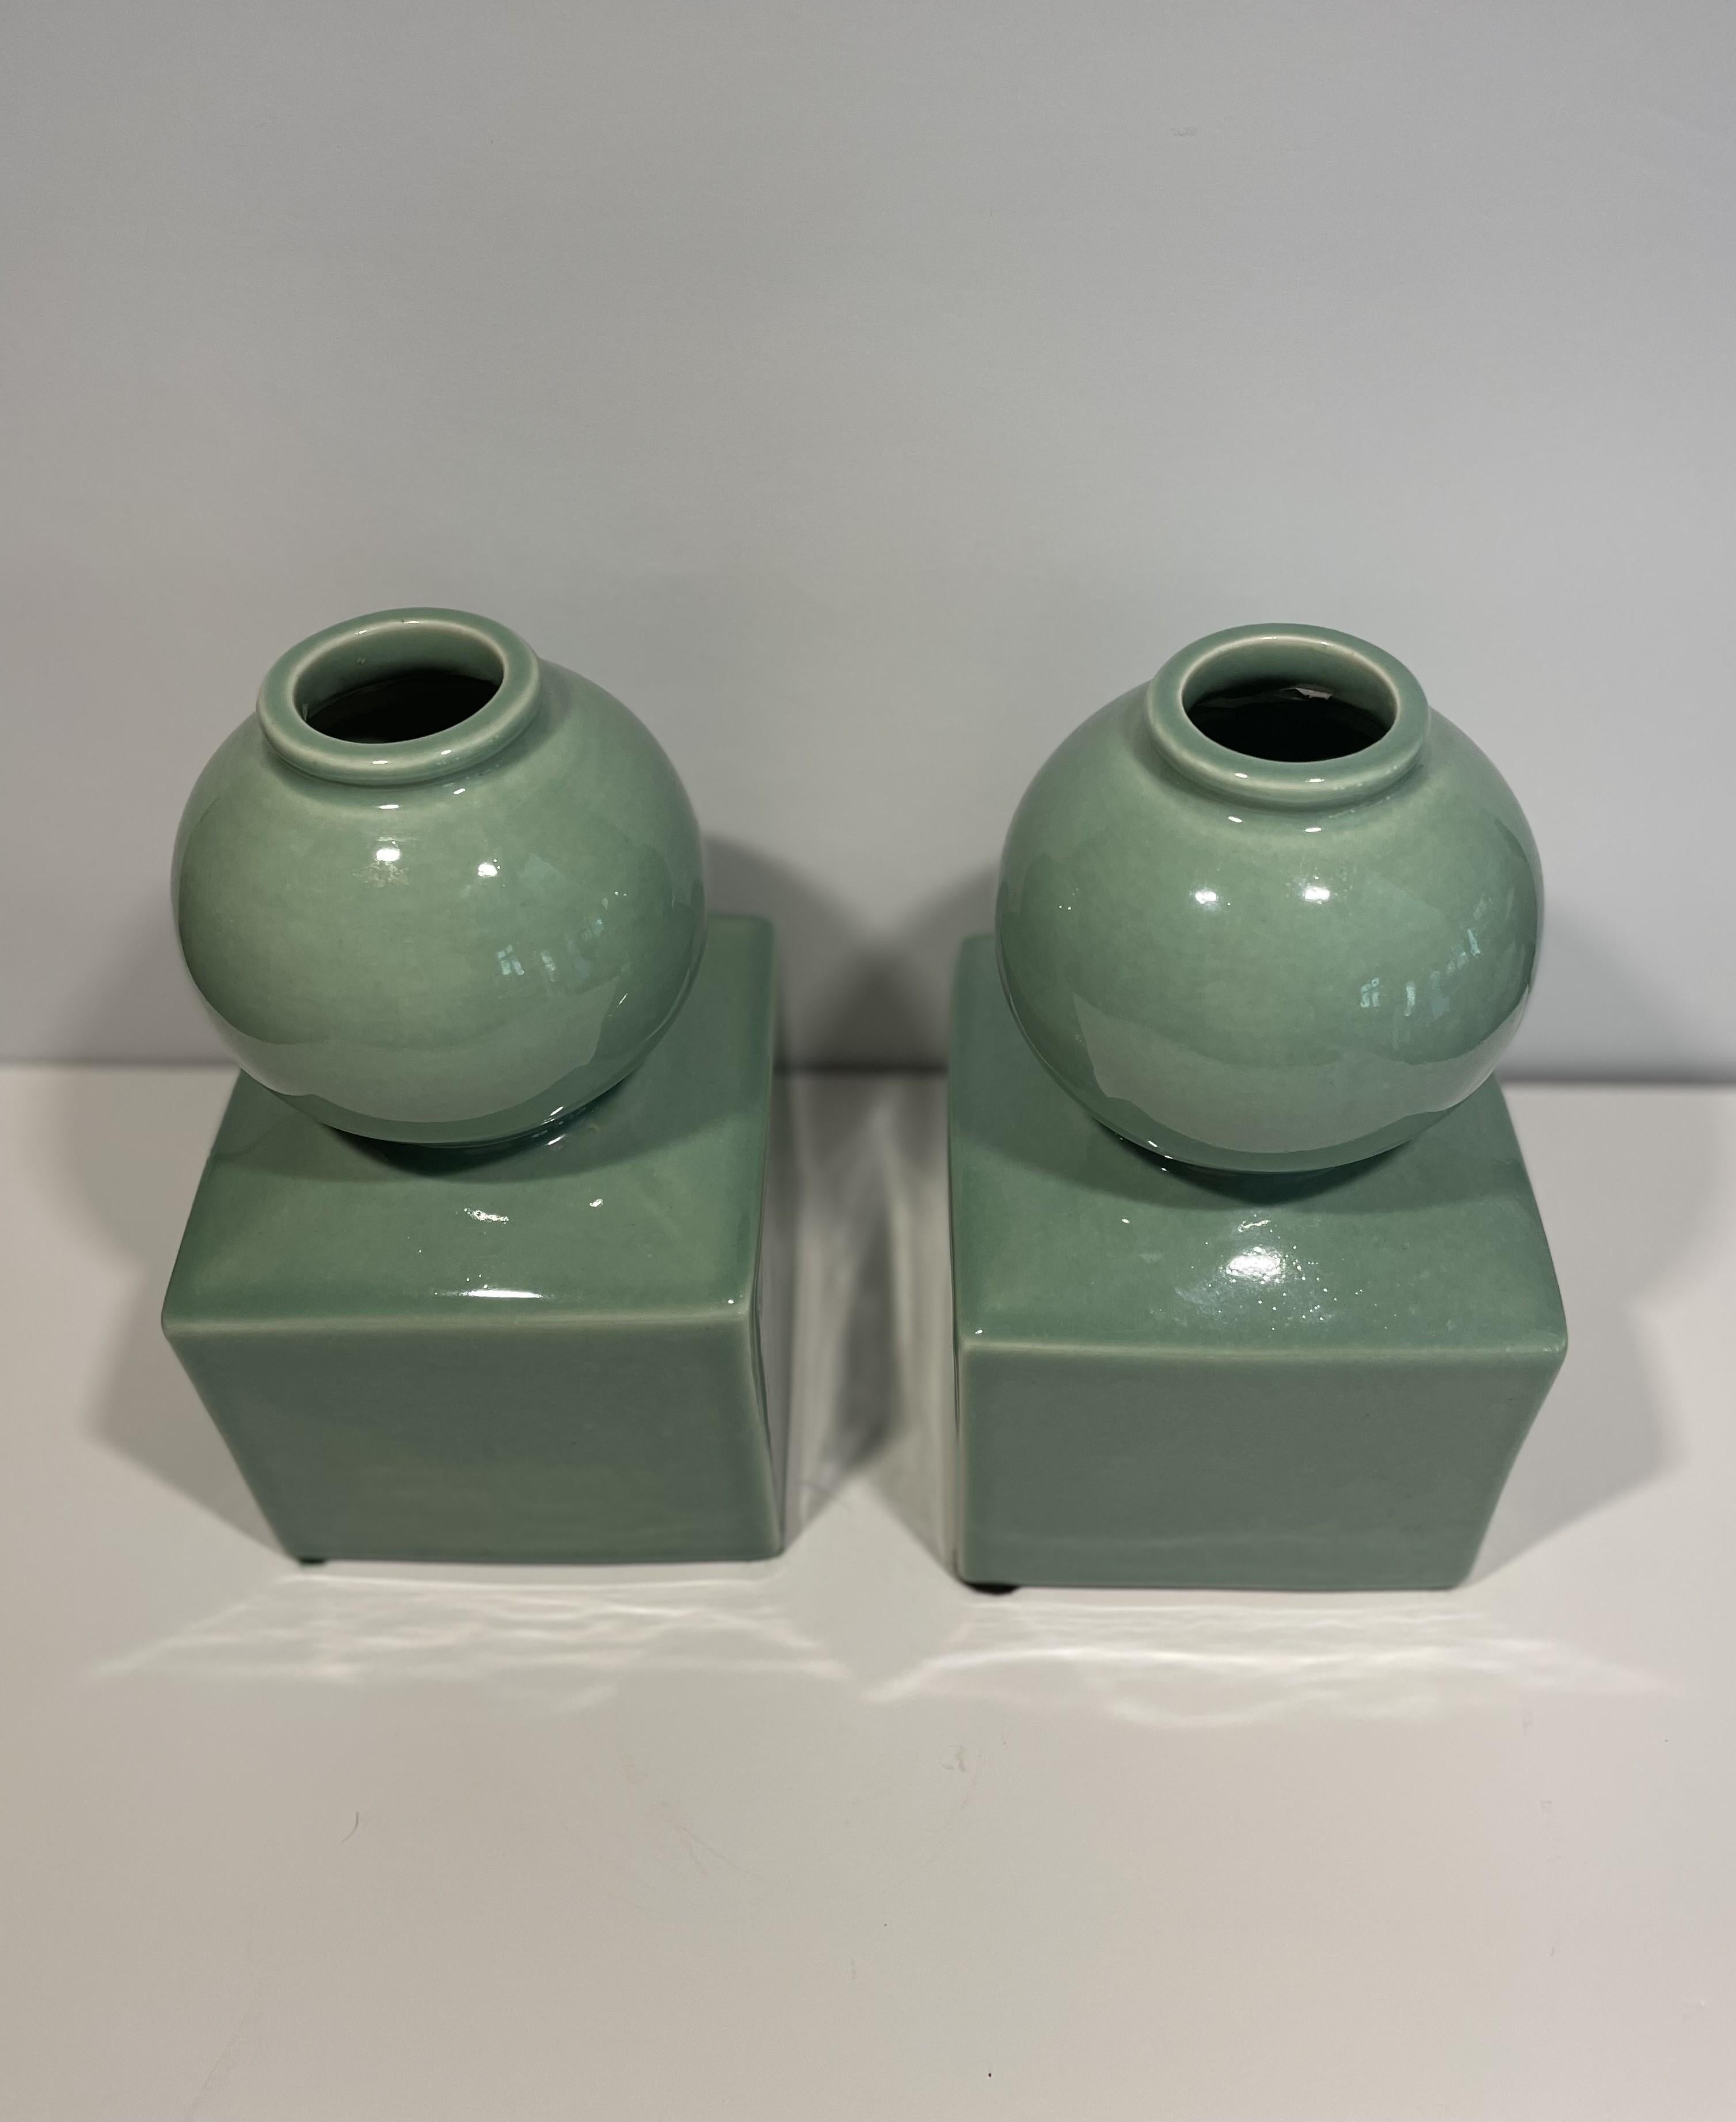 Celadon Ceramic Vases or Bookends Attributed to Serena & Lily -- A Pair In Excellent Condition For Sale In Austin, TX